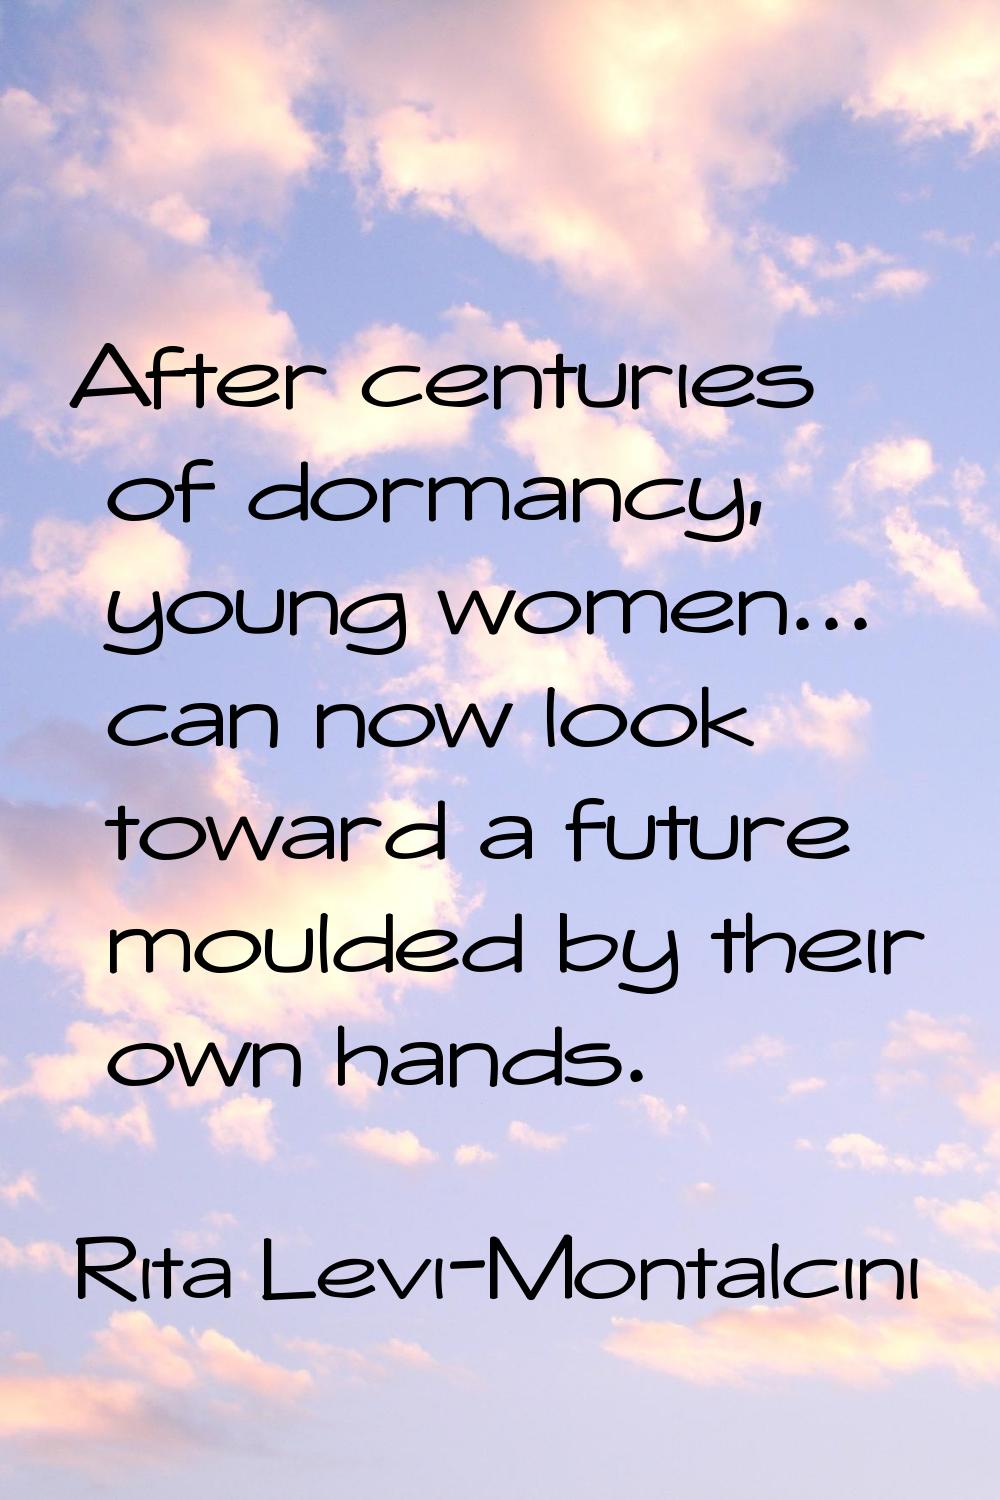 After centuries of dormancy, young women... can now look toward a future moulded by their own hands